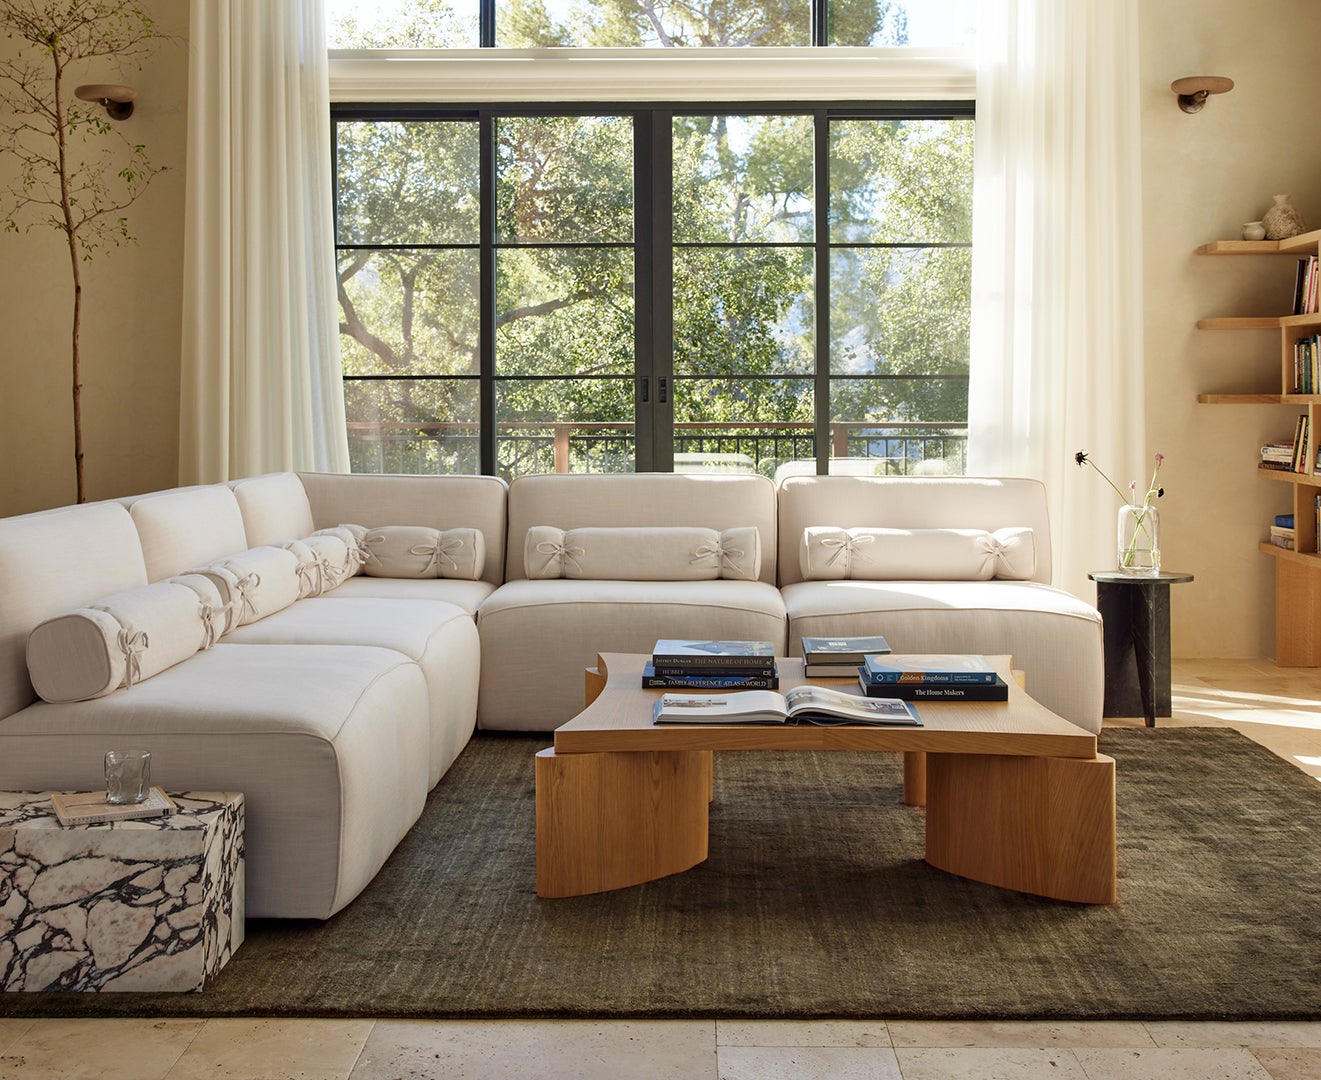 White L-shaped sofa in a living room